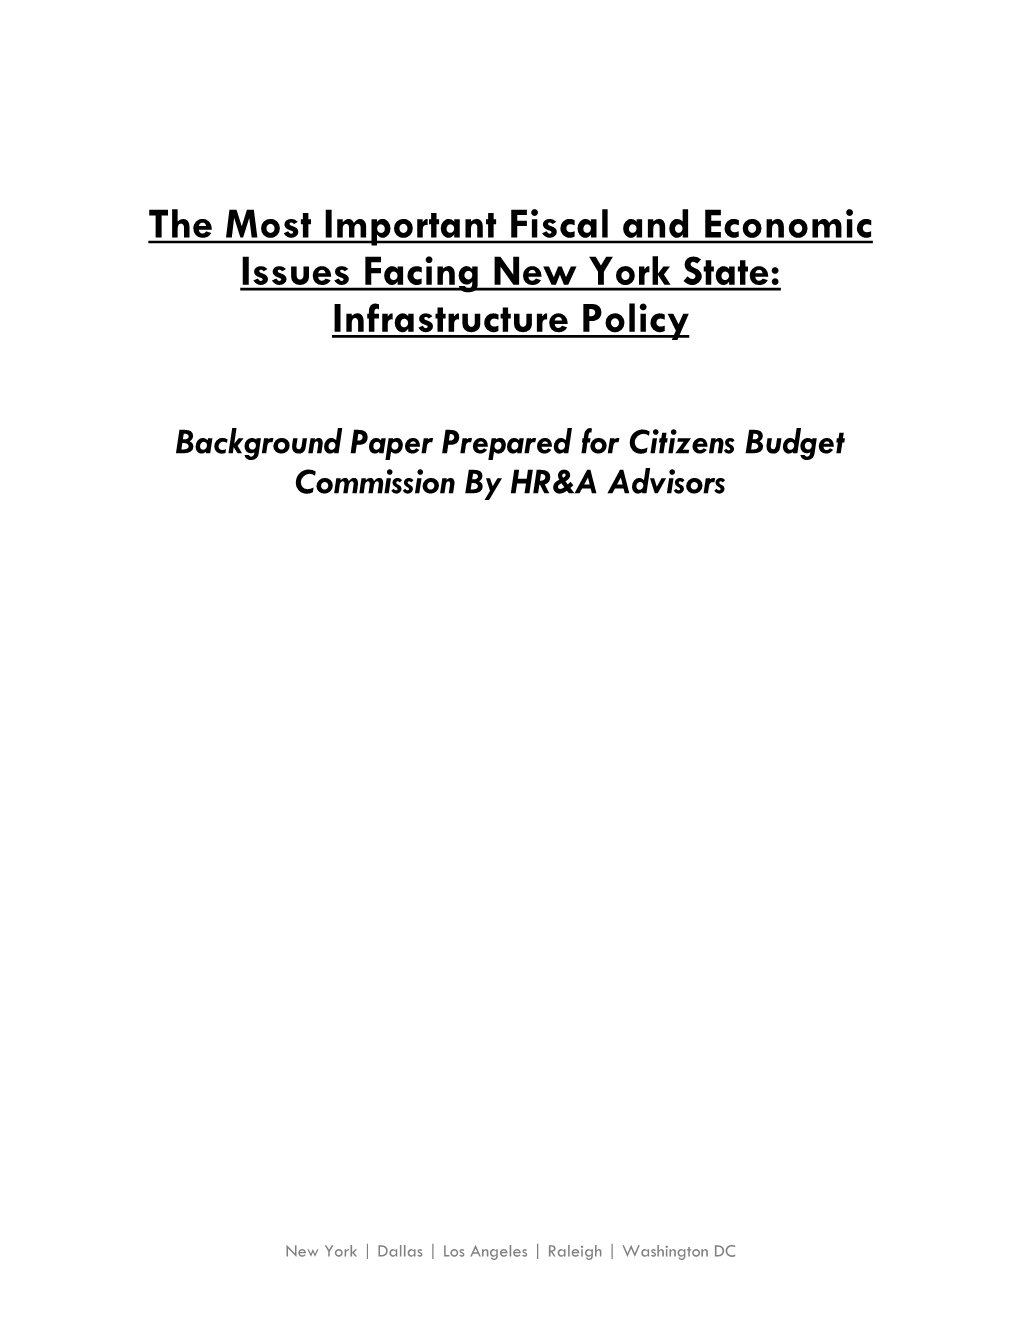 Infrastructure Policy